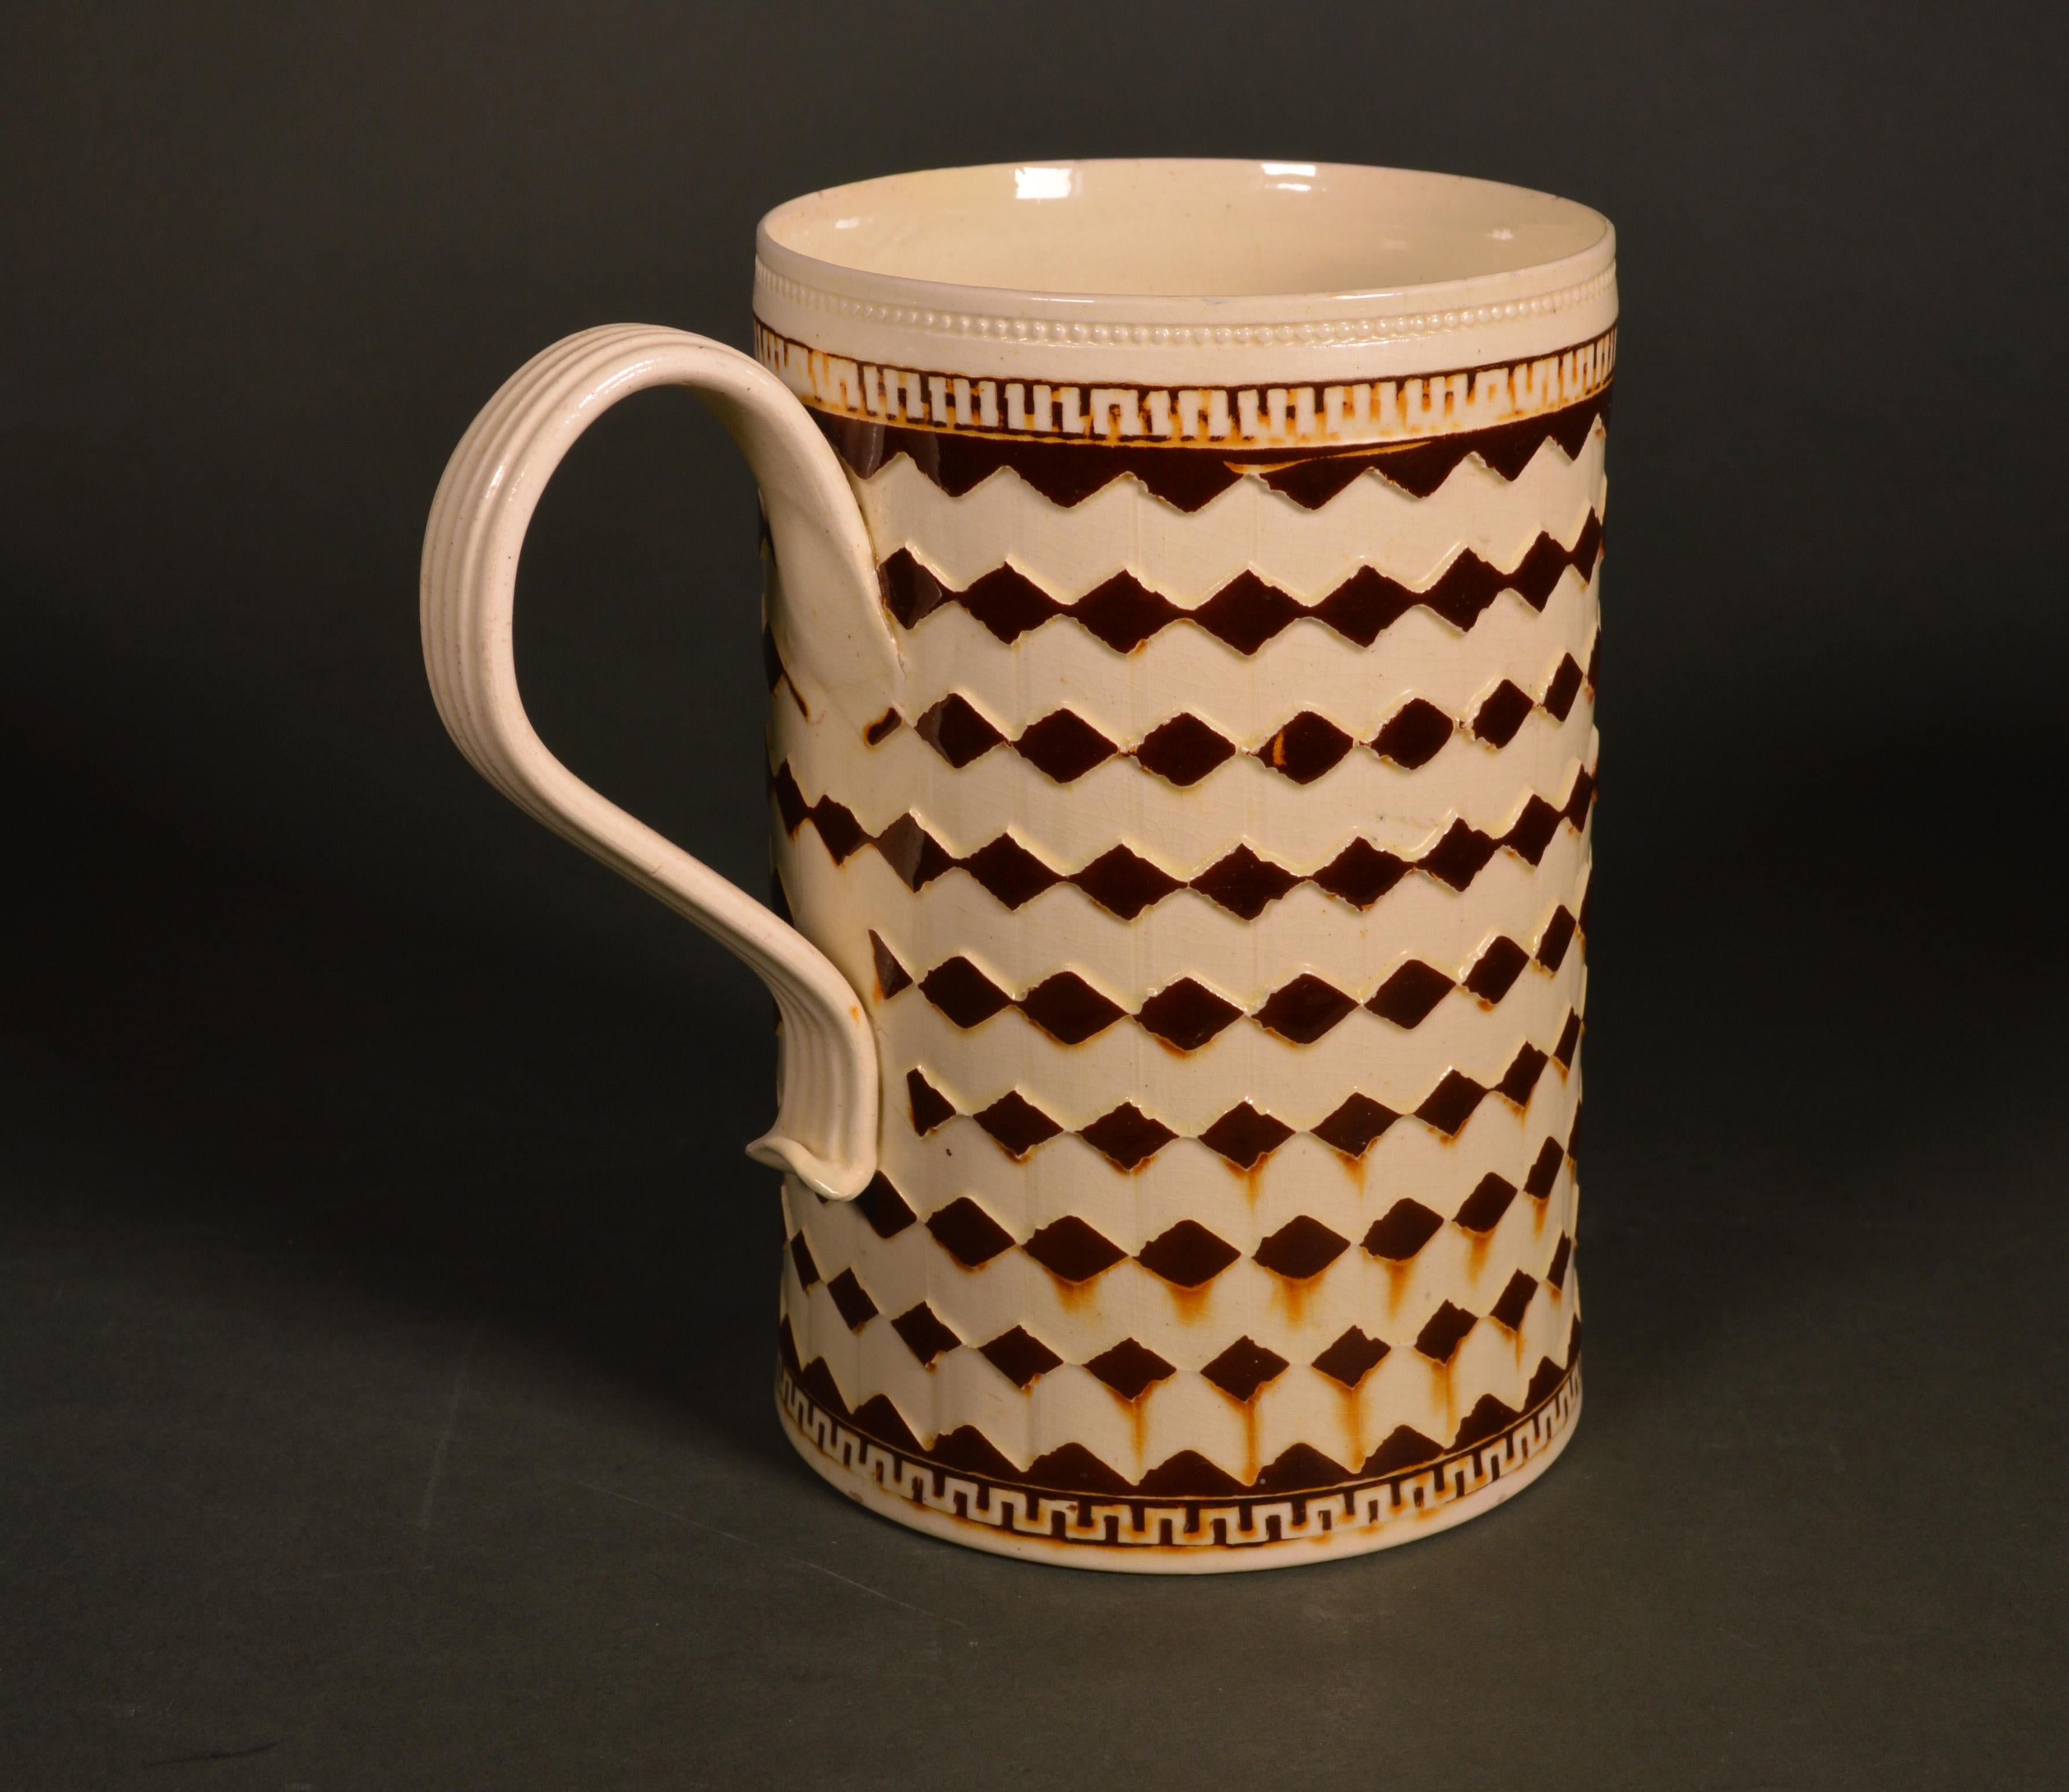 Stunning creamware mocha large tankard with bands of diamonds,
circa 1800-1820,
  

The charming and striking cylindrical mug with a creamware body is decorated with nine bands of raised diamonds colored brown. At the foot and rim is a Greek key